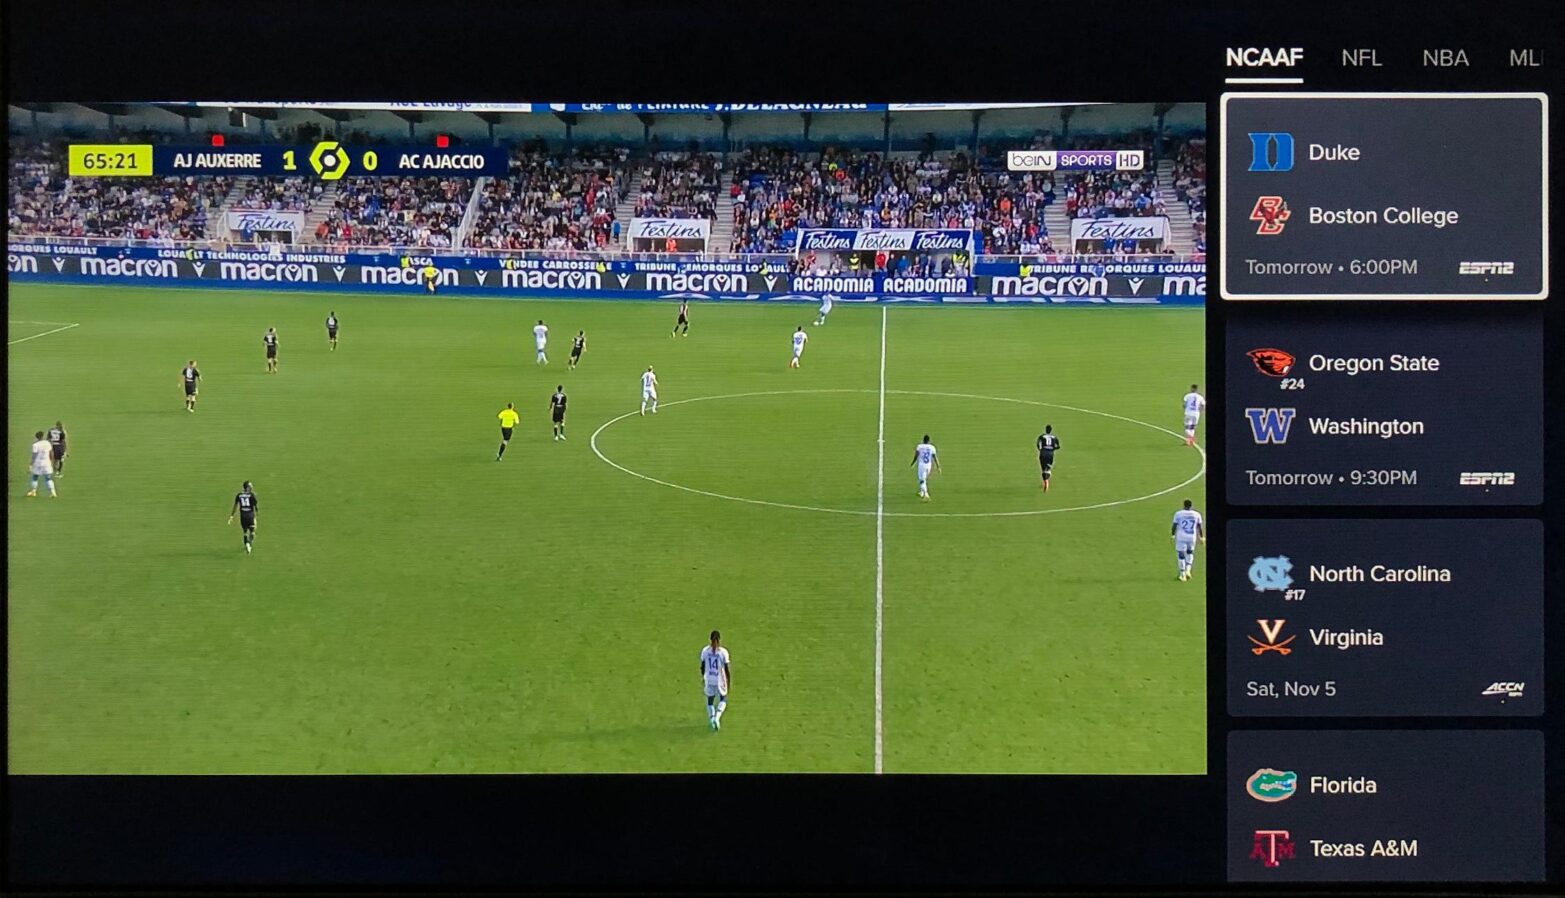 A Ligue 1 soccer match plays while displaying upcoming NCAA football games to the right of the video player.